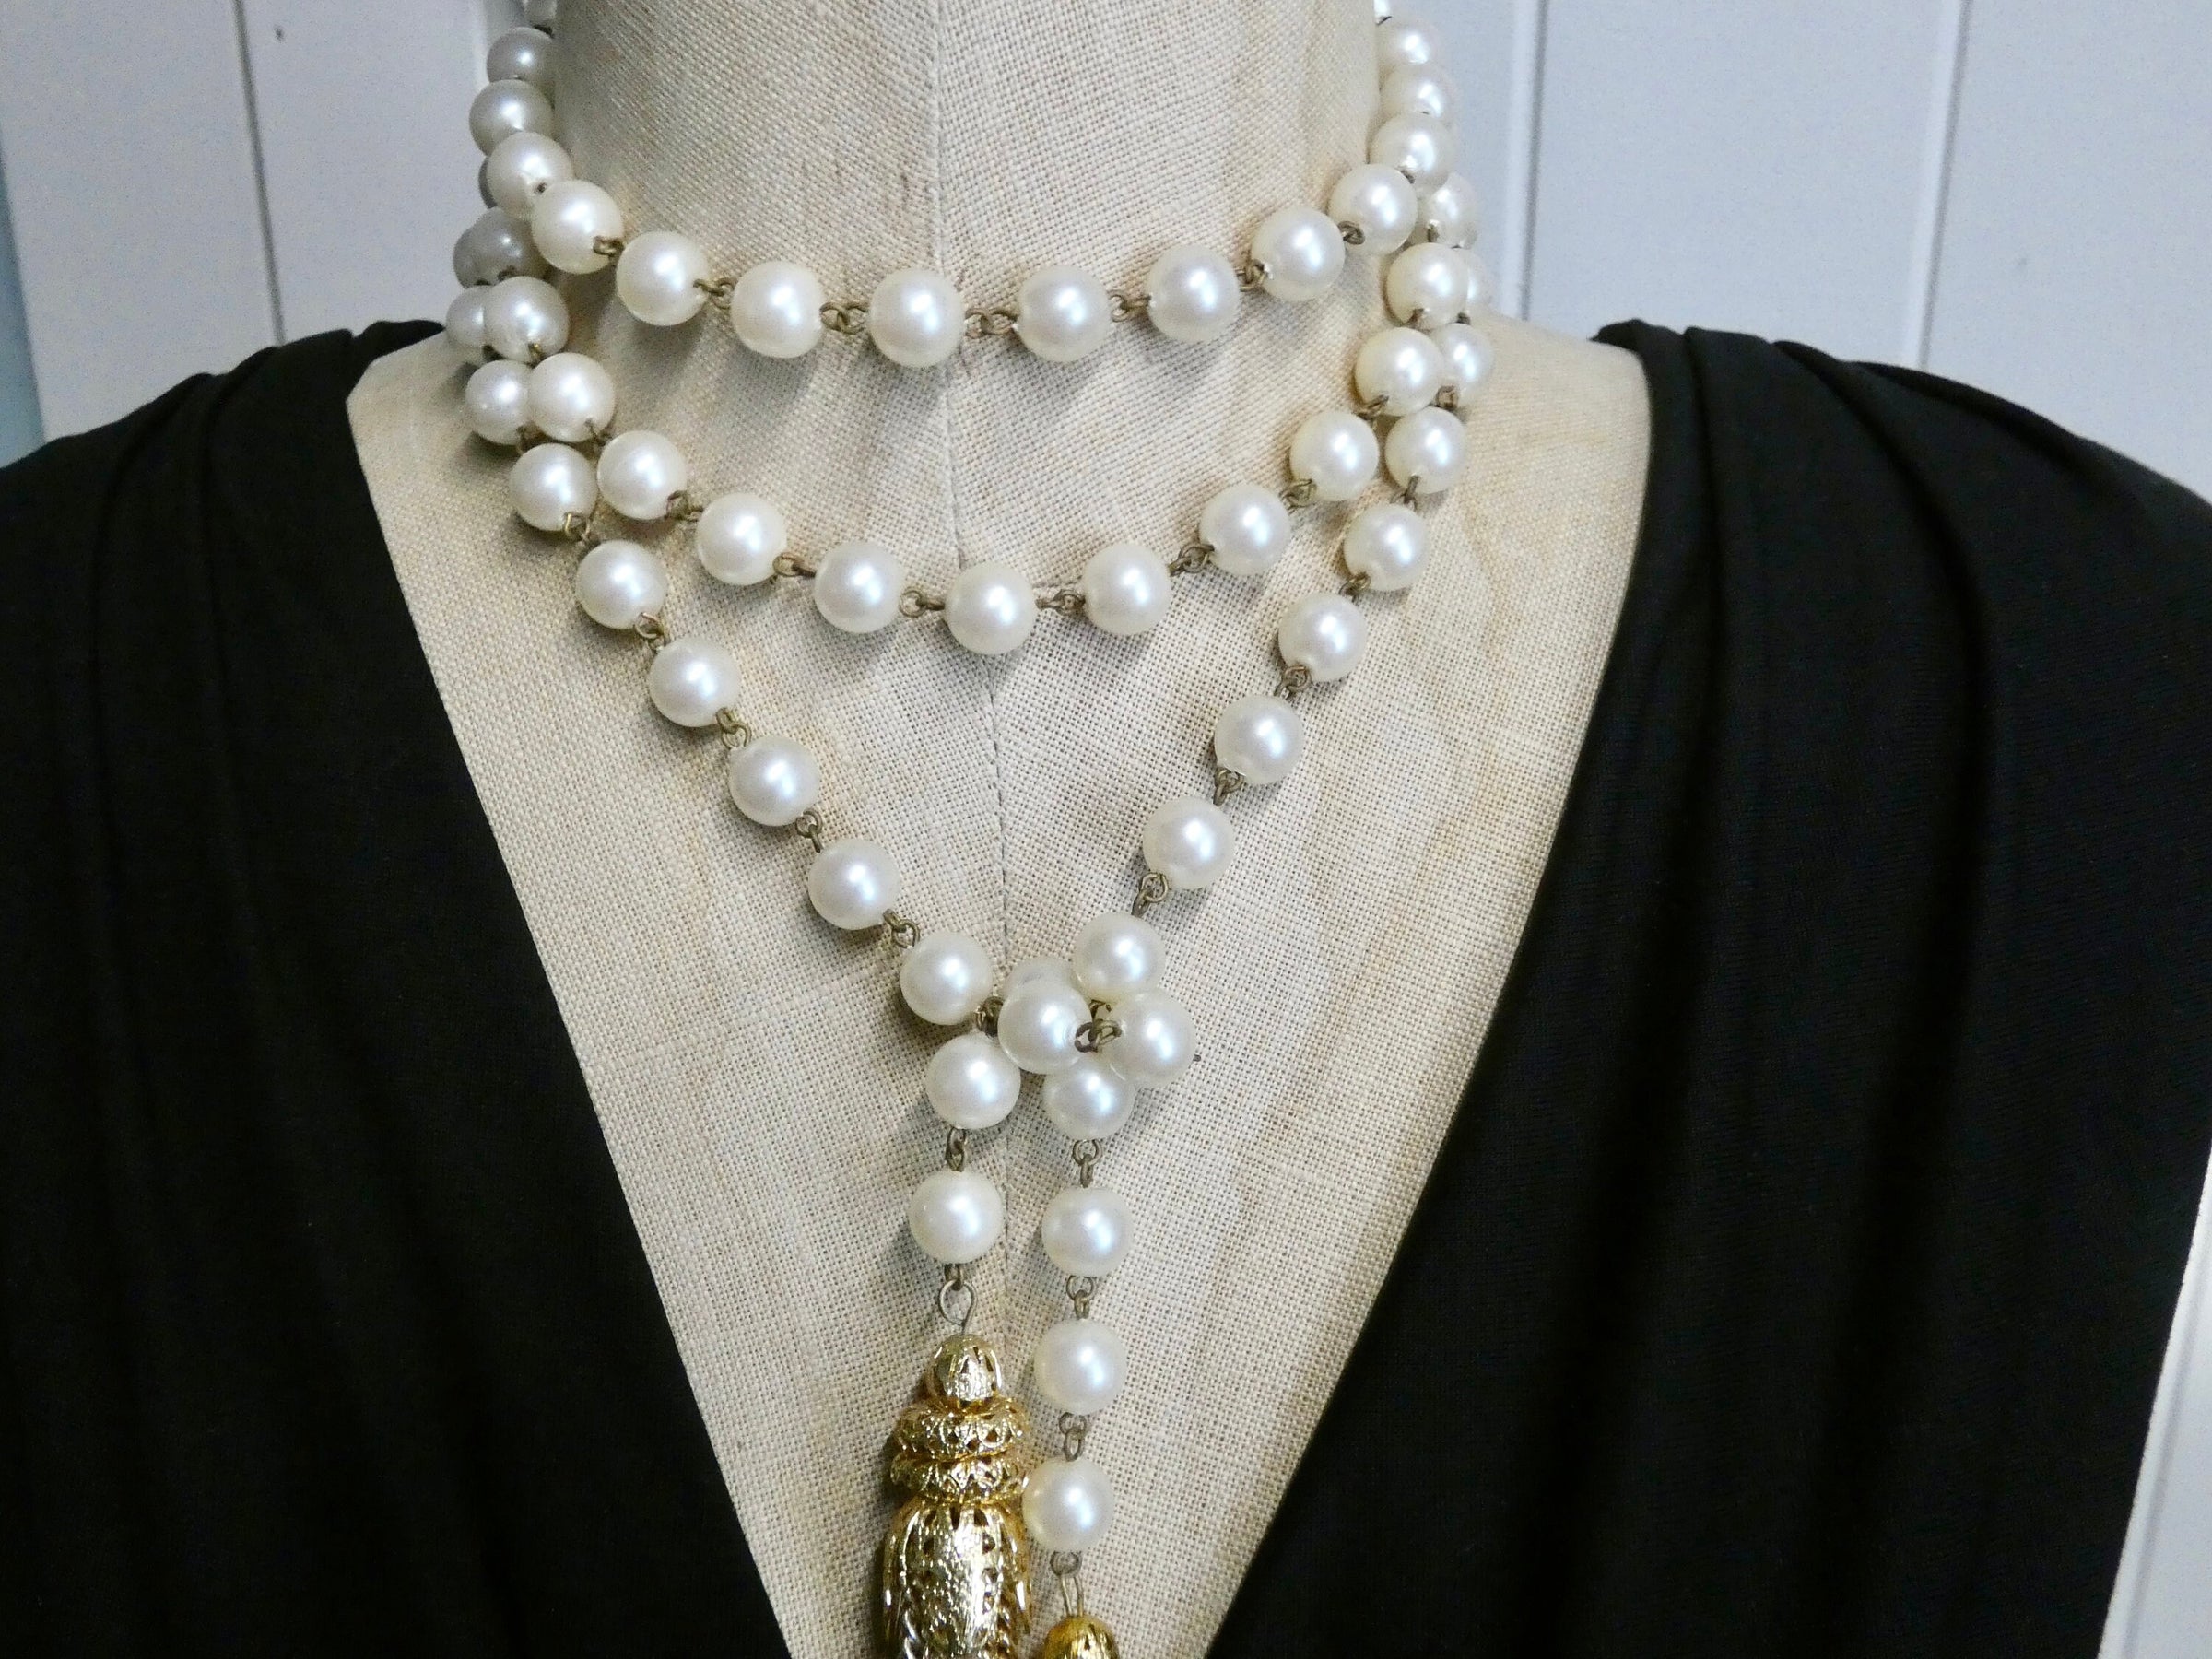 Lariat Pearl and Tassel Necklace, Vintage Gold Tassel Pendant with pearl rosary bead chain